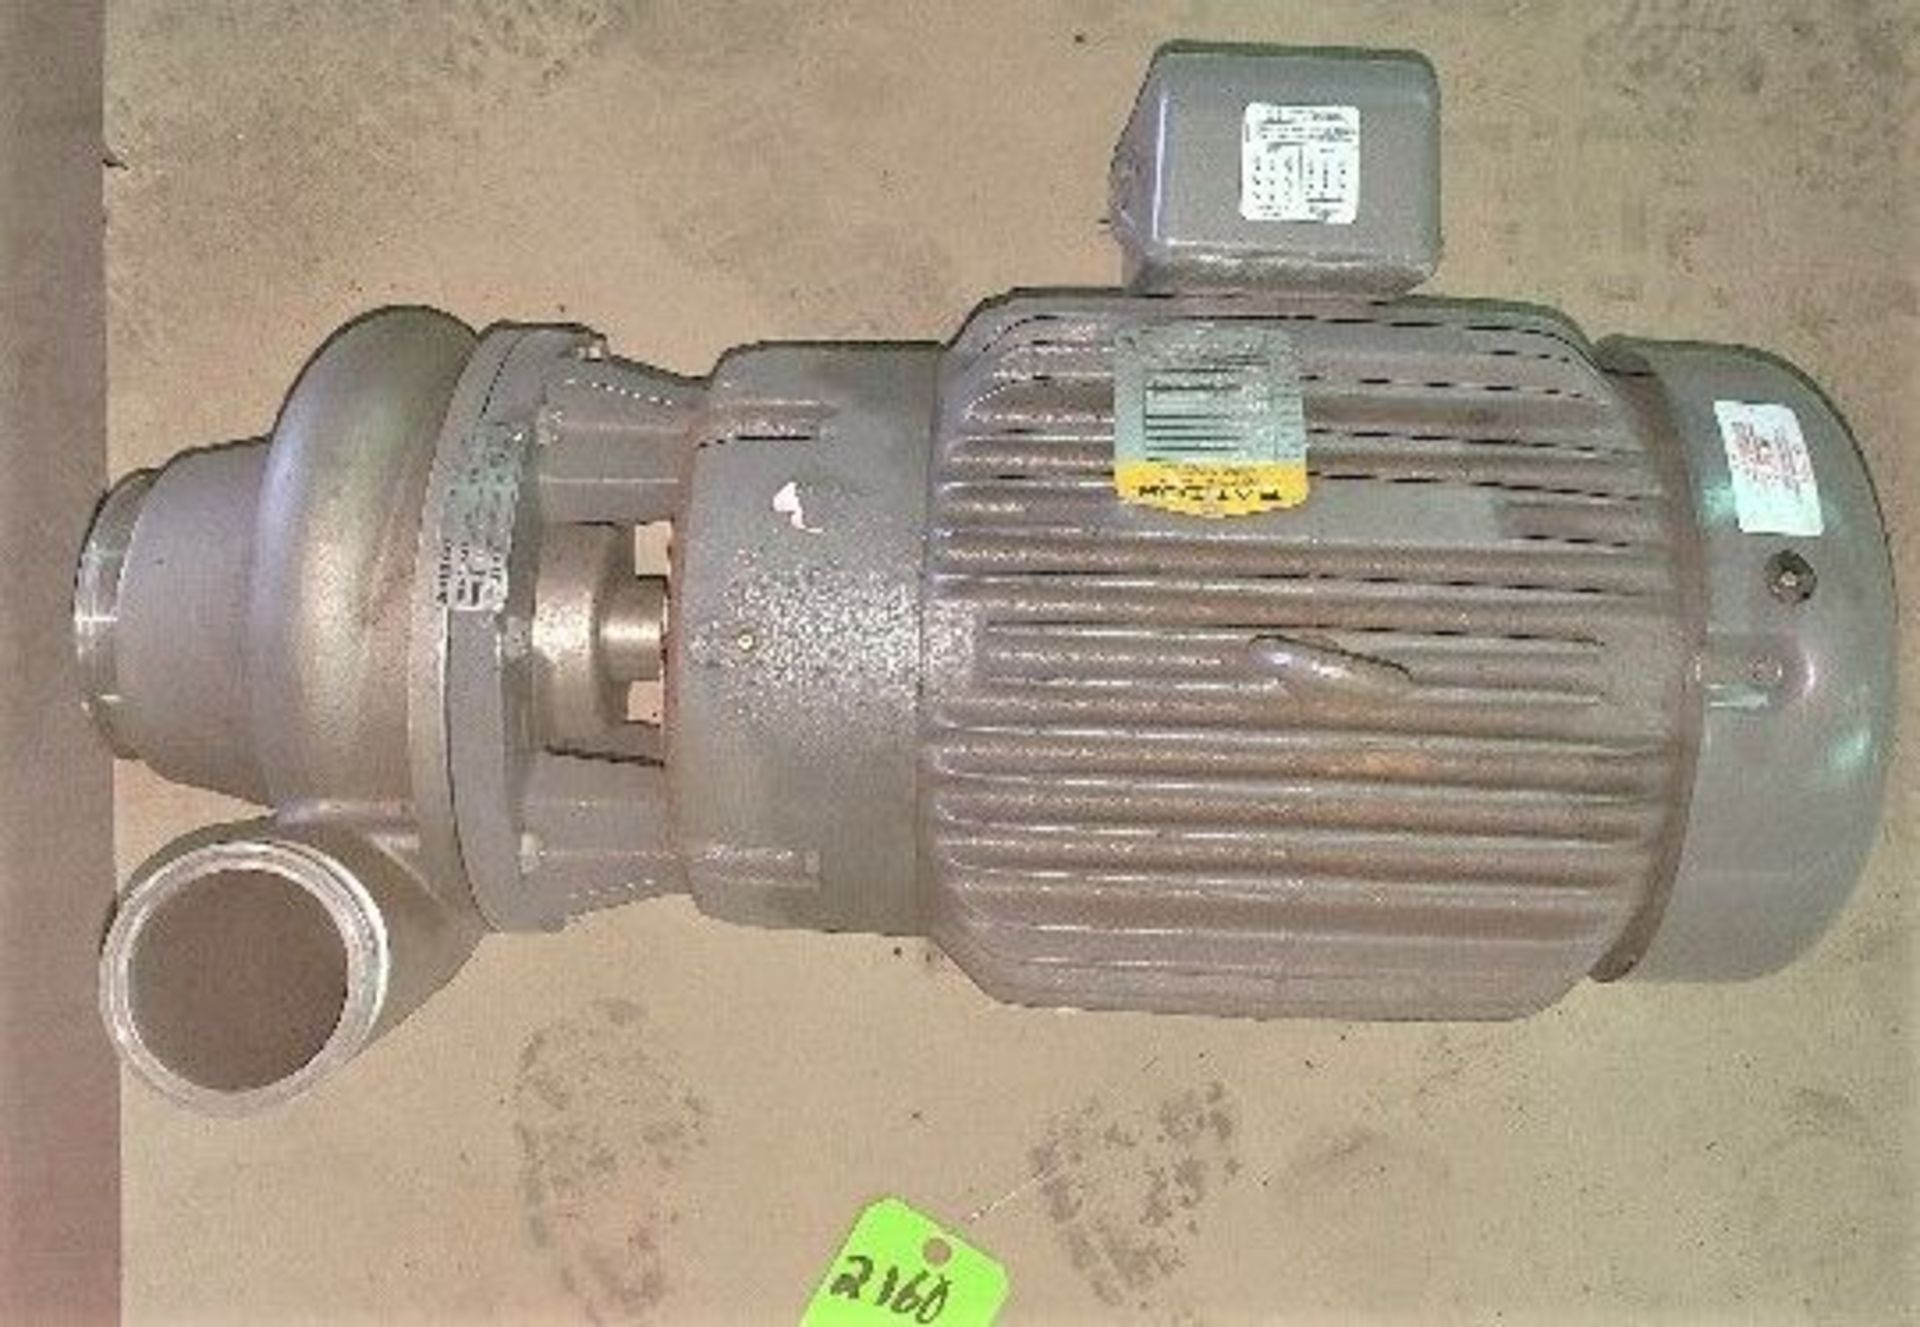 Qty (1) Sanitary Centrifugal Pump - 7 1/2 hp - 3450 rpm - 3 phase - 2 inch inlet - 1 1/2 inch outlet